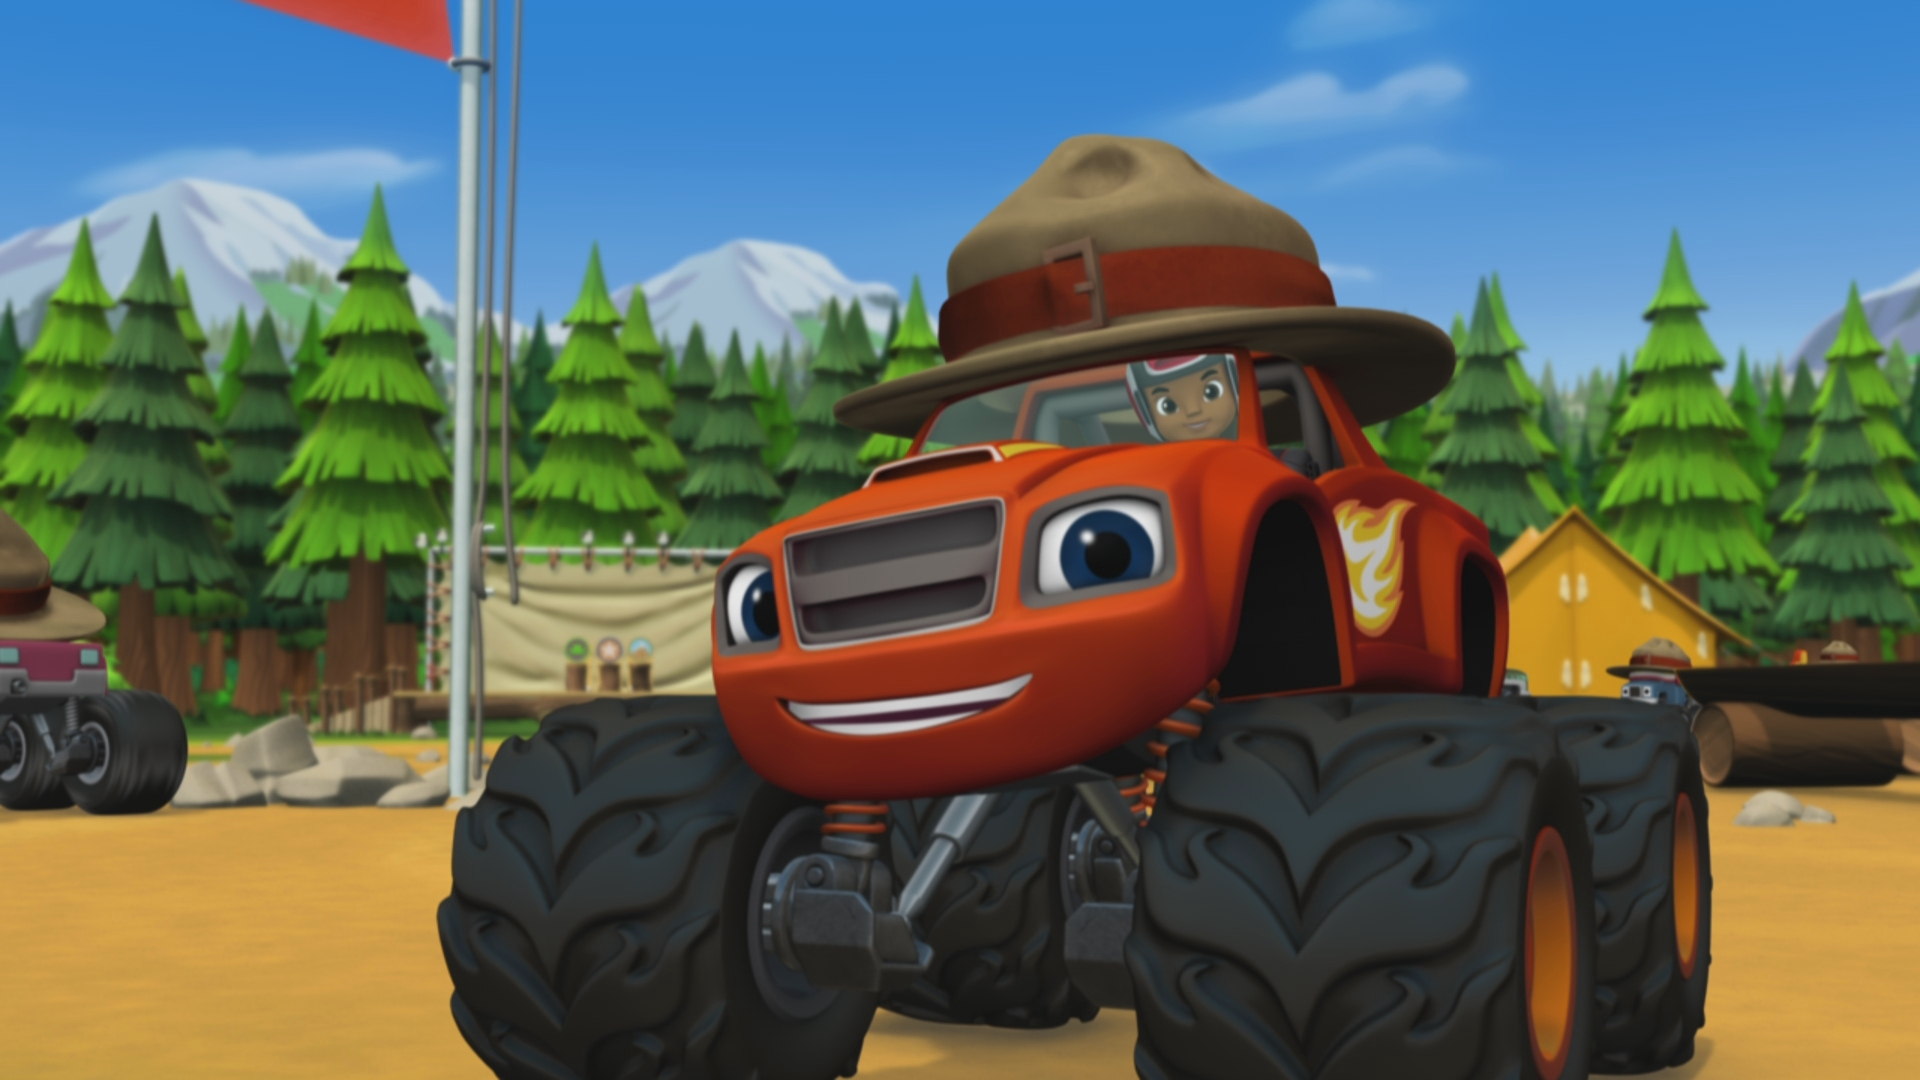 Watch Blaze and the Monster Machines Season 1 Episode 14: Truck Rangers -  Full show on Paramount Plus